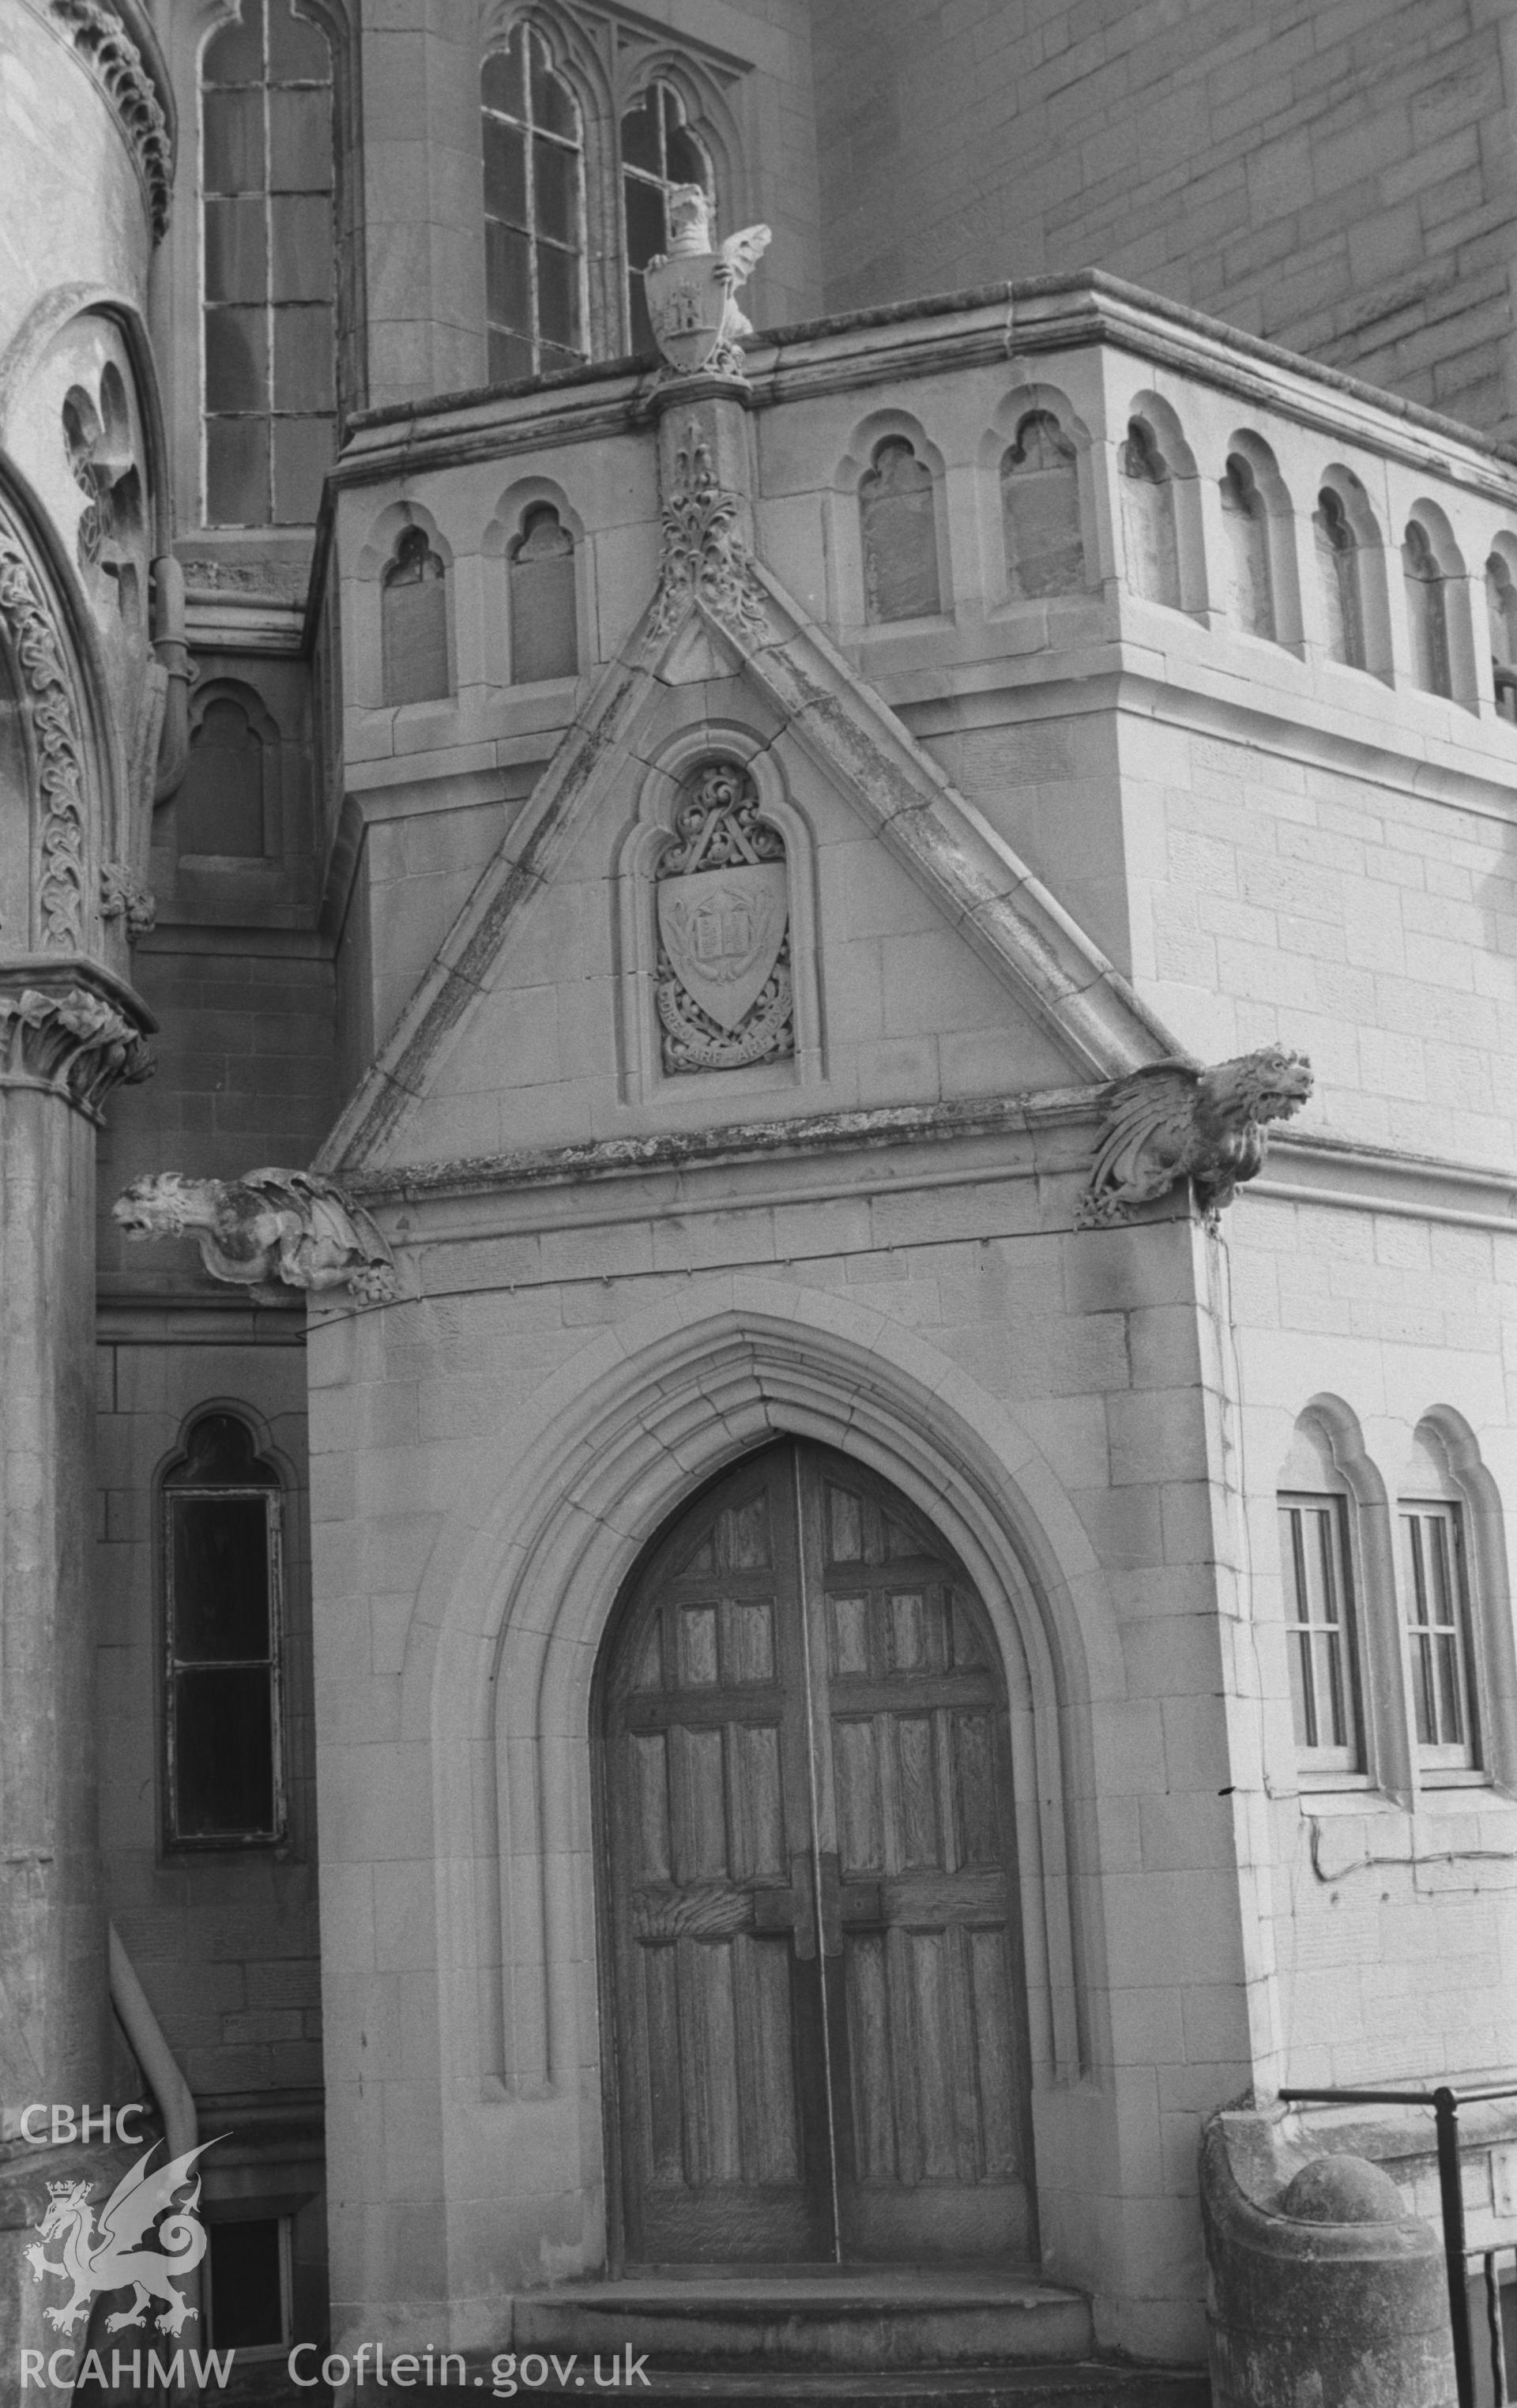 Digital copy of a black and white negative showing detail of entrance in the north west facing side of the Old College, on Aberystwyth promenade. Photographed by Arthur O. Chater on 15th August 1967 from Grid Reference SN 581 817.